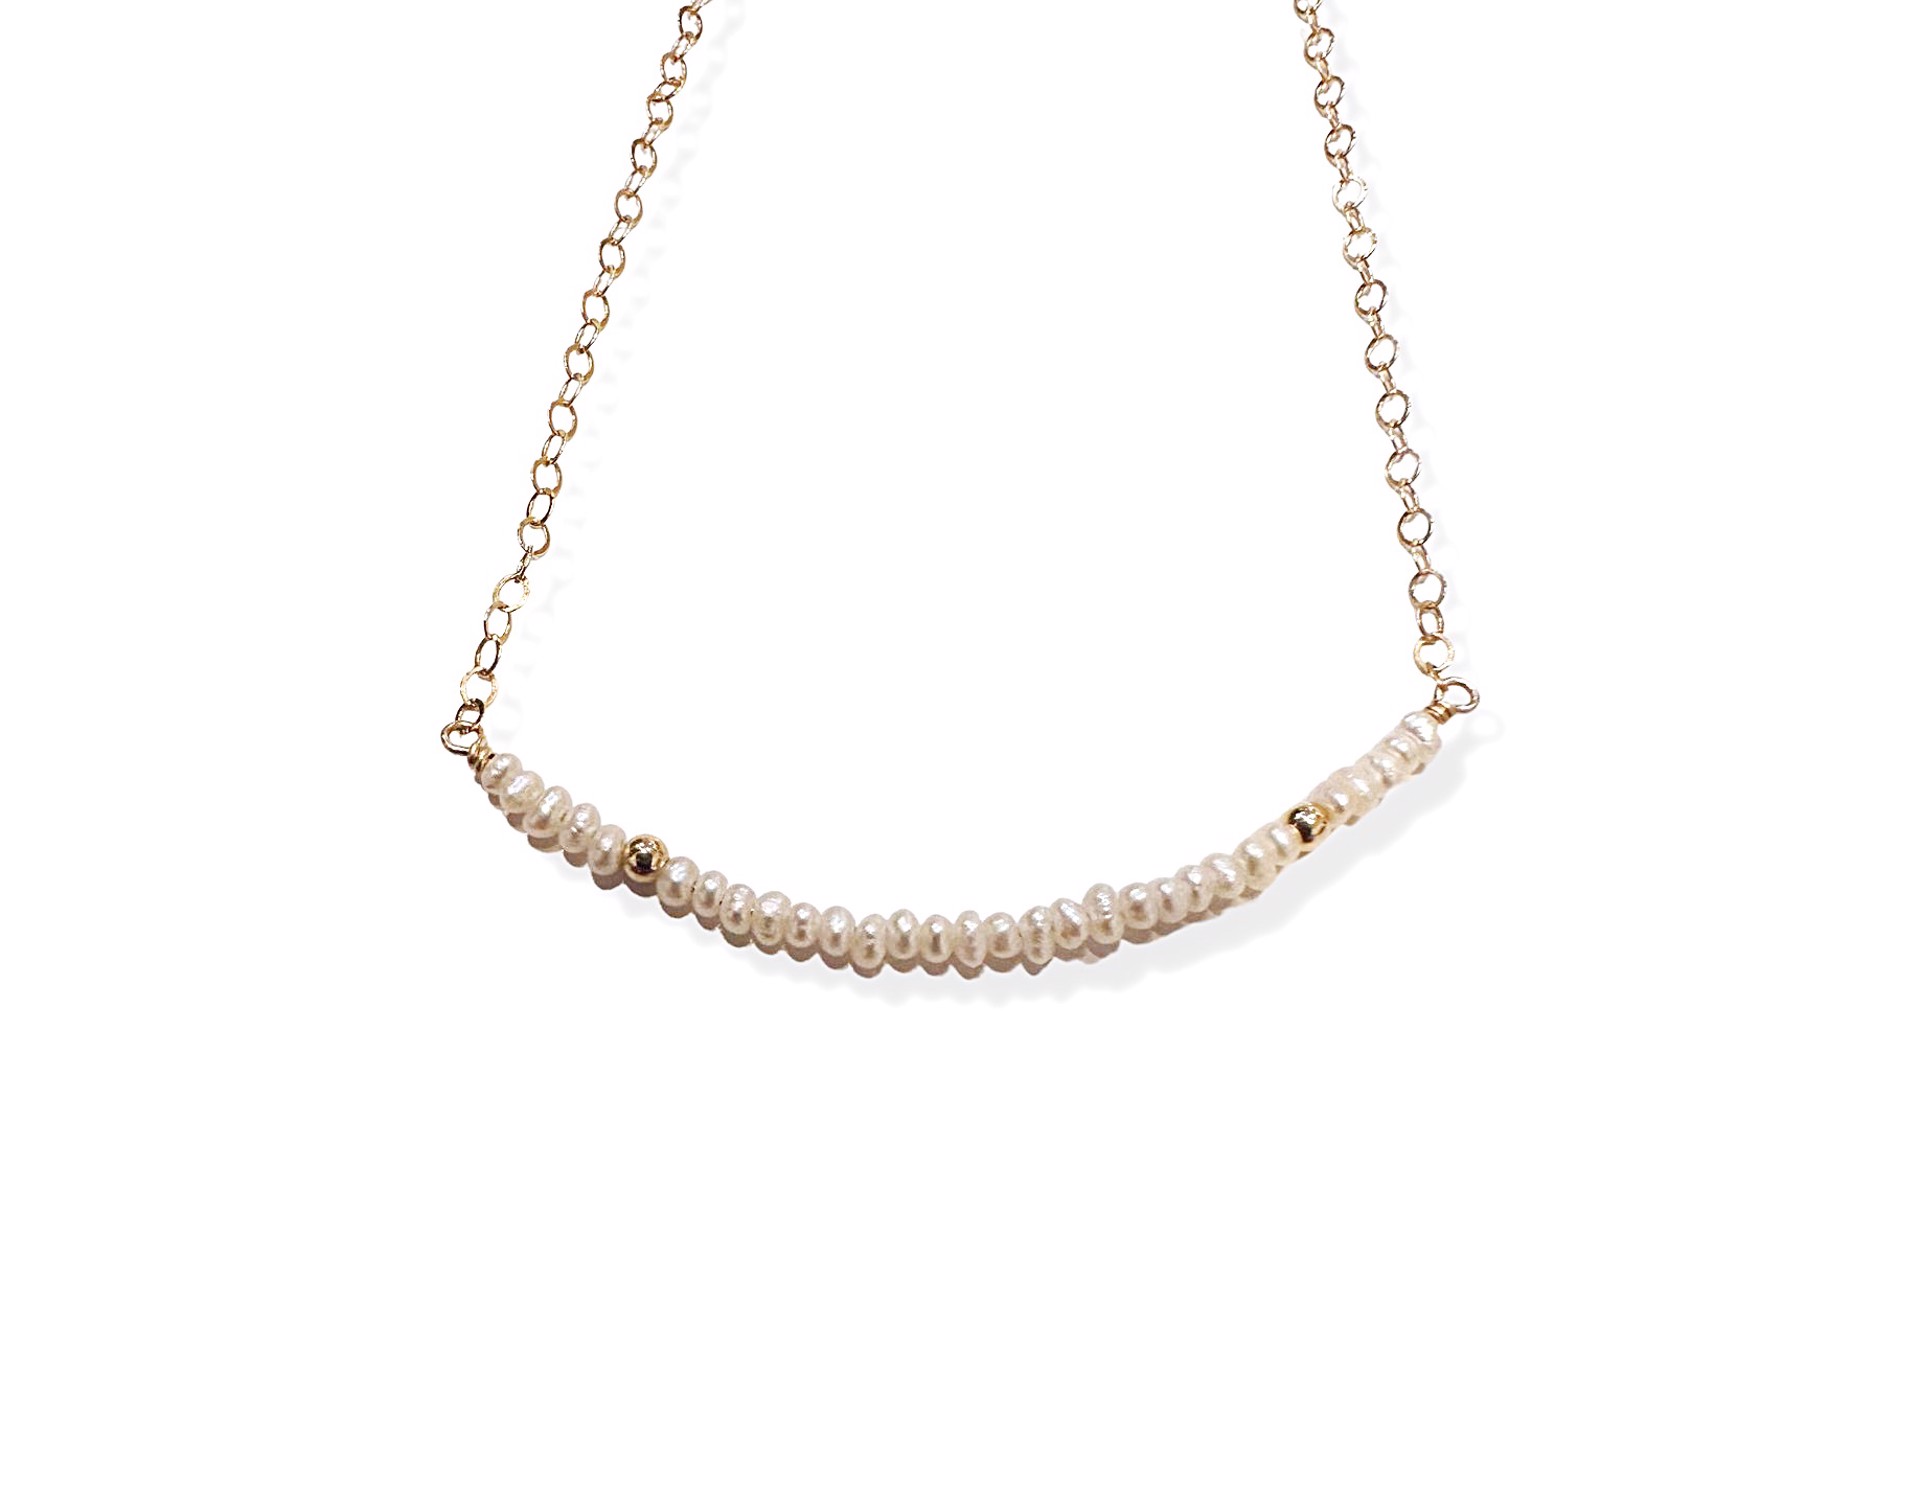 Necklace - 14K Gold Filled with Freshwater Pearl and Gold Beads by Julia Balestracci